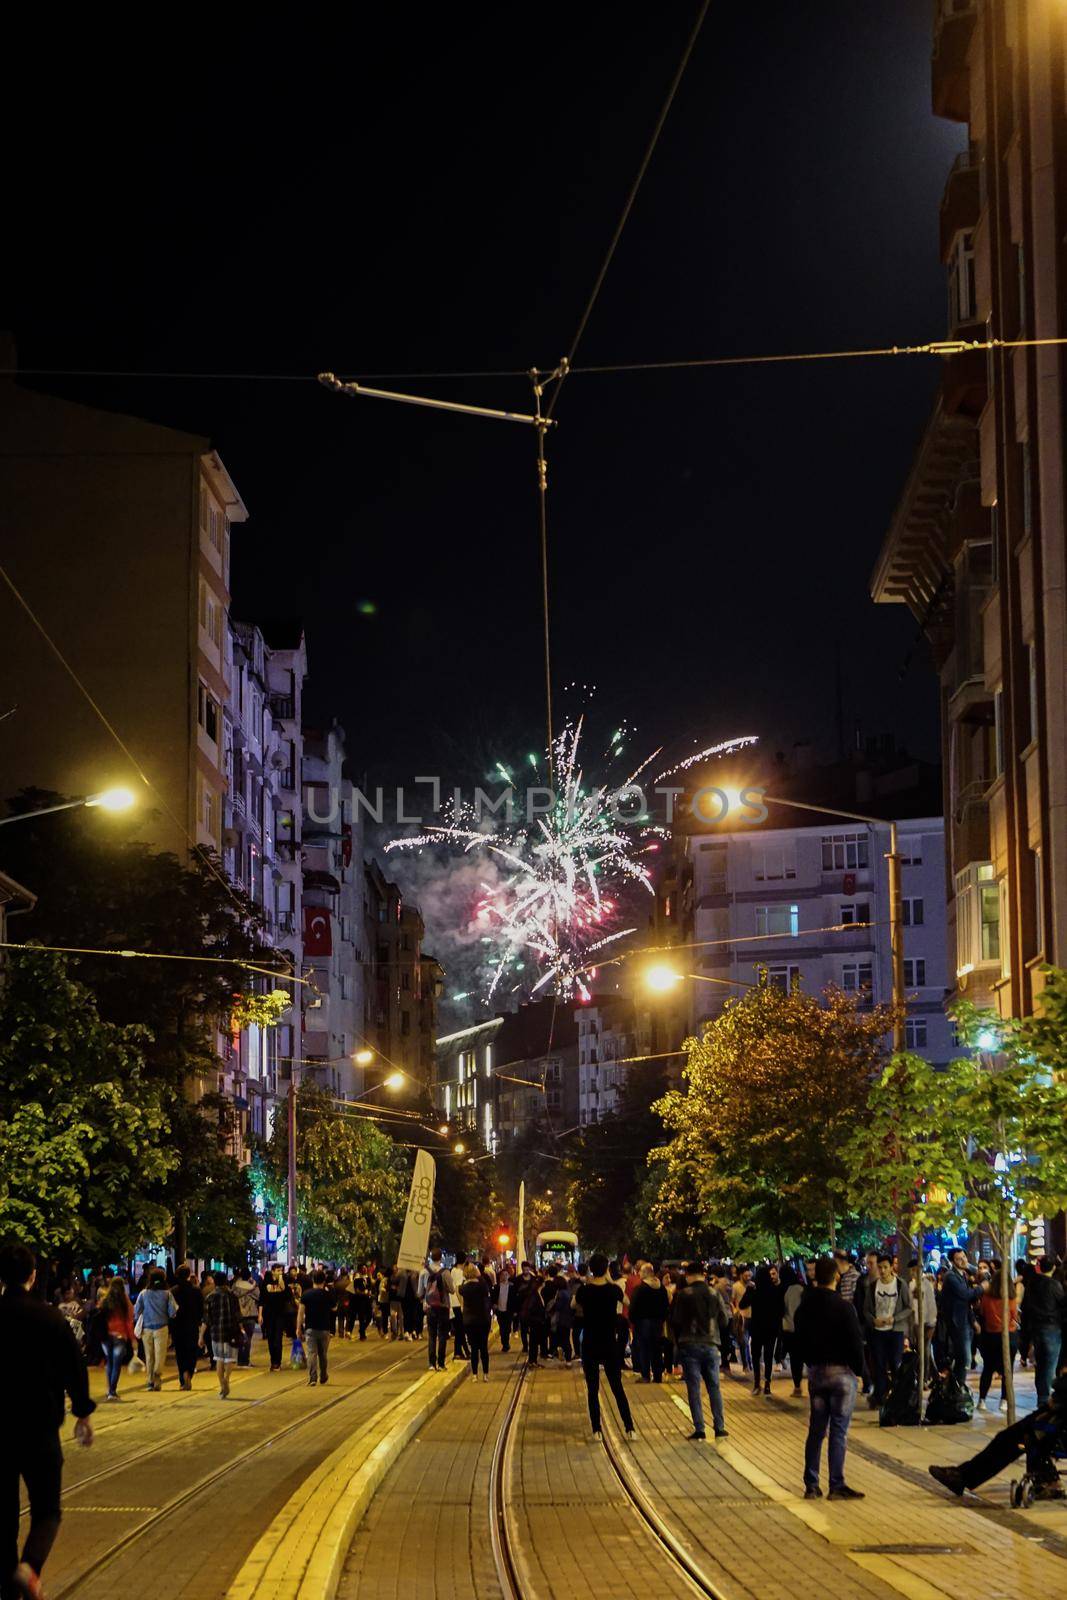 19 May 2019 Eskisehir, Turkey. 19 May National independence and sovereignty day celebrations in Eskisehir